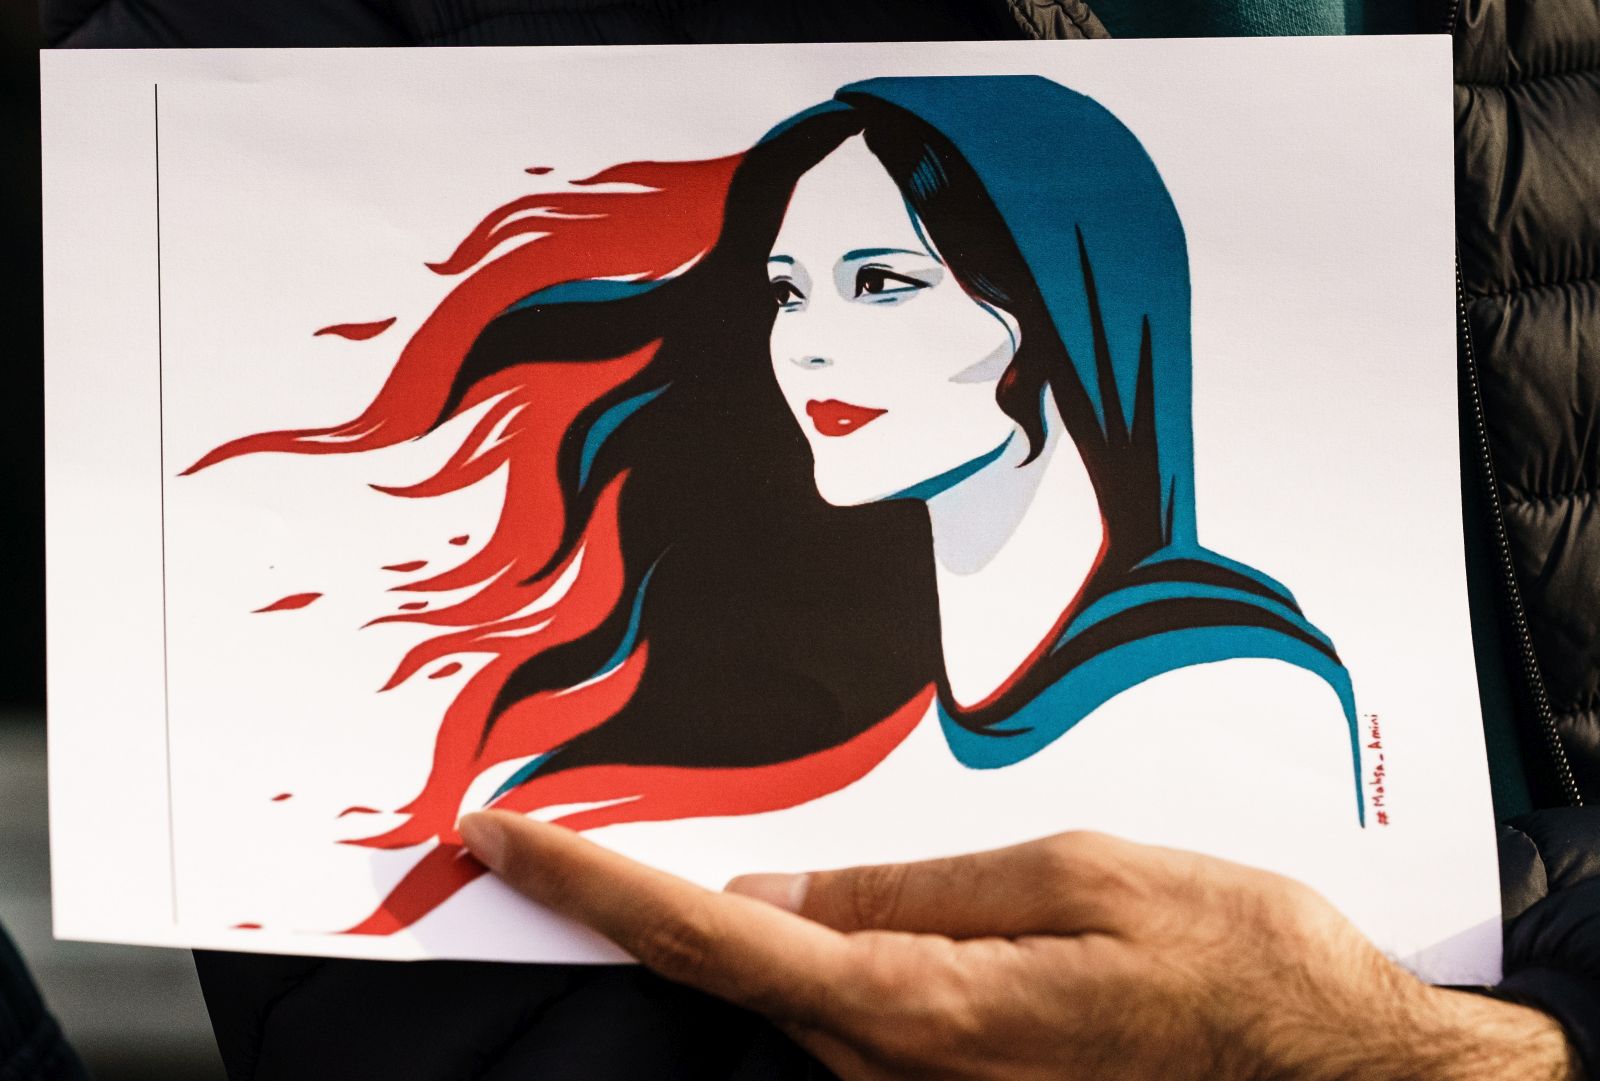 epa10201920 A participant holds an illustration showing Mahsa Amini during a rally in Berlin, Germany, 23 September 2022. Iran has faced many anti-government protests following the death of Mahsa Amini, a 22-year-old Iranian woman, who was arrested in Tehran on 13 September by the morality police, a unit responsible for enforcing Iran's strict dress code for women. She fell into a coma while in police custody and was declared dead on 16 September, with the authorities saying she died of a heart failure while her family advising that she had no prior health conditions. Her death has triggered protests in various areas in Iran and around the world. According to Iran's state news agency IRNA, Iranian President Ebrahim Raisi expressed his sympathy to the family of Amini on a phone call and assured them that her death will be investigated carefully. Chief Justice of Iran Gholam-Hossein Mohseni-Eje'i assured her family that upon its conclusion, the investigation results by the Iranian Legal Medicine Organization will be announced without any special considerations.  EPA/CLEMENS BILAN